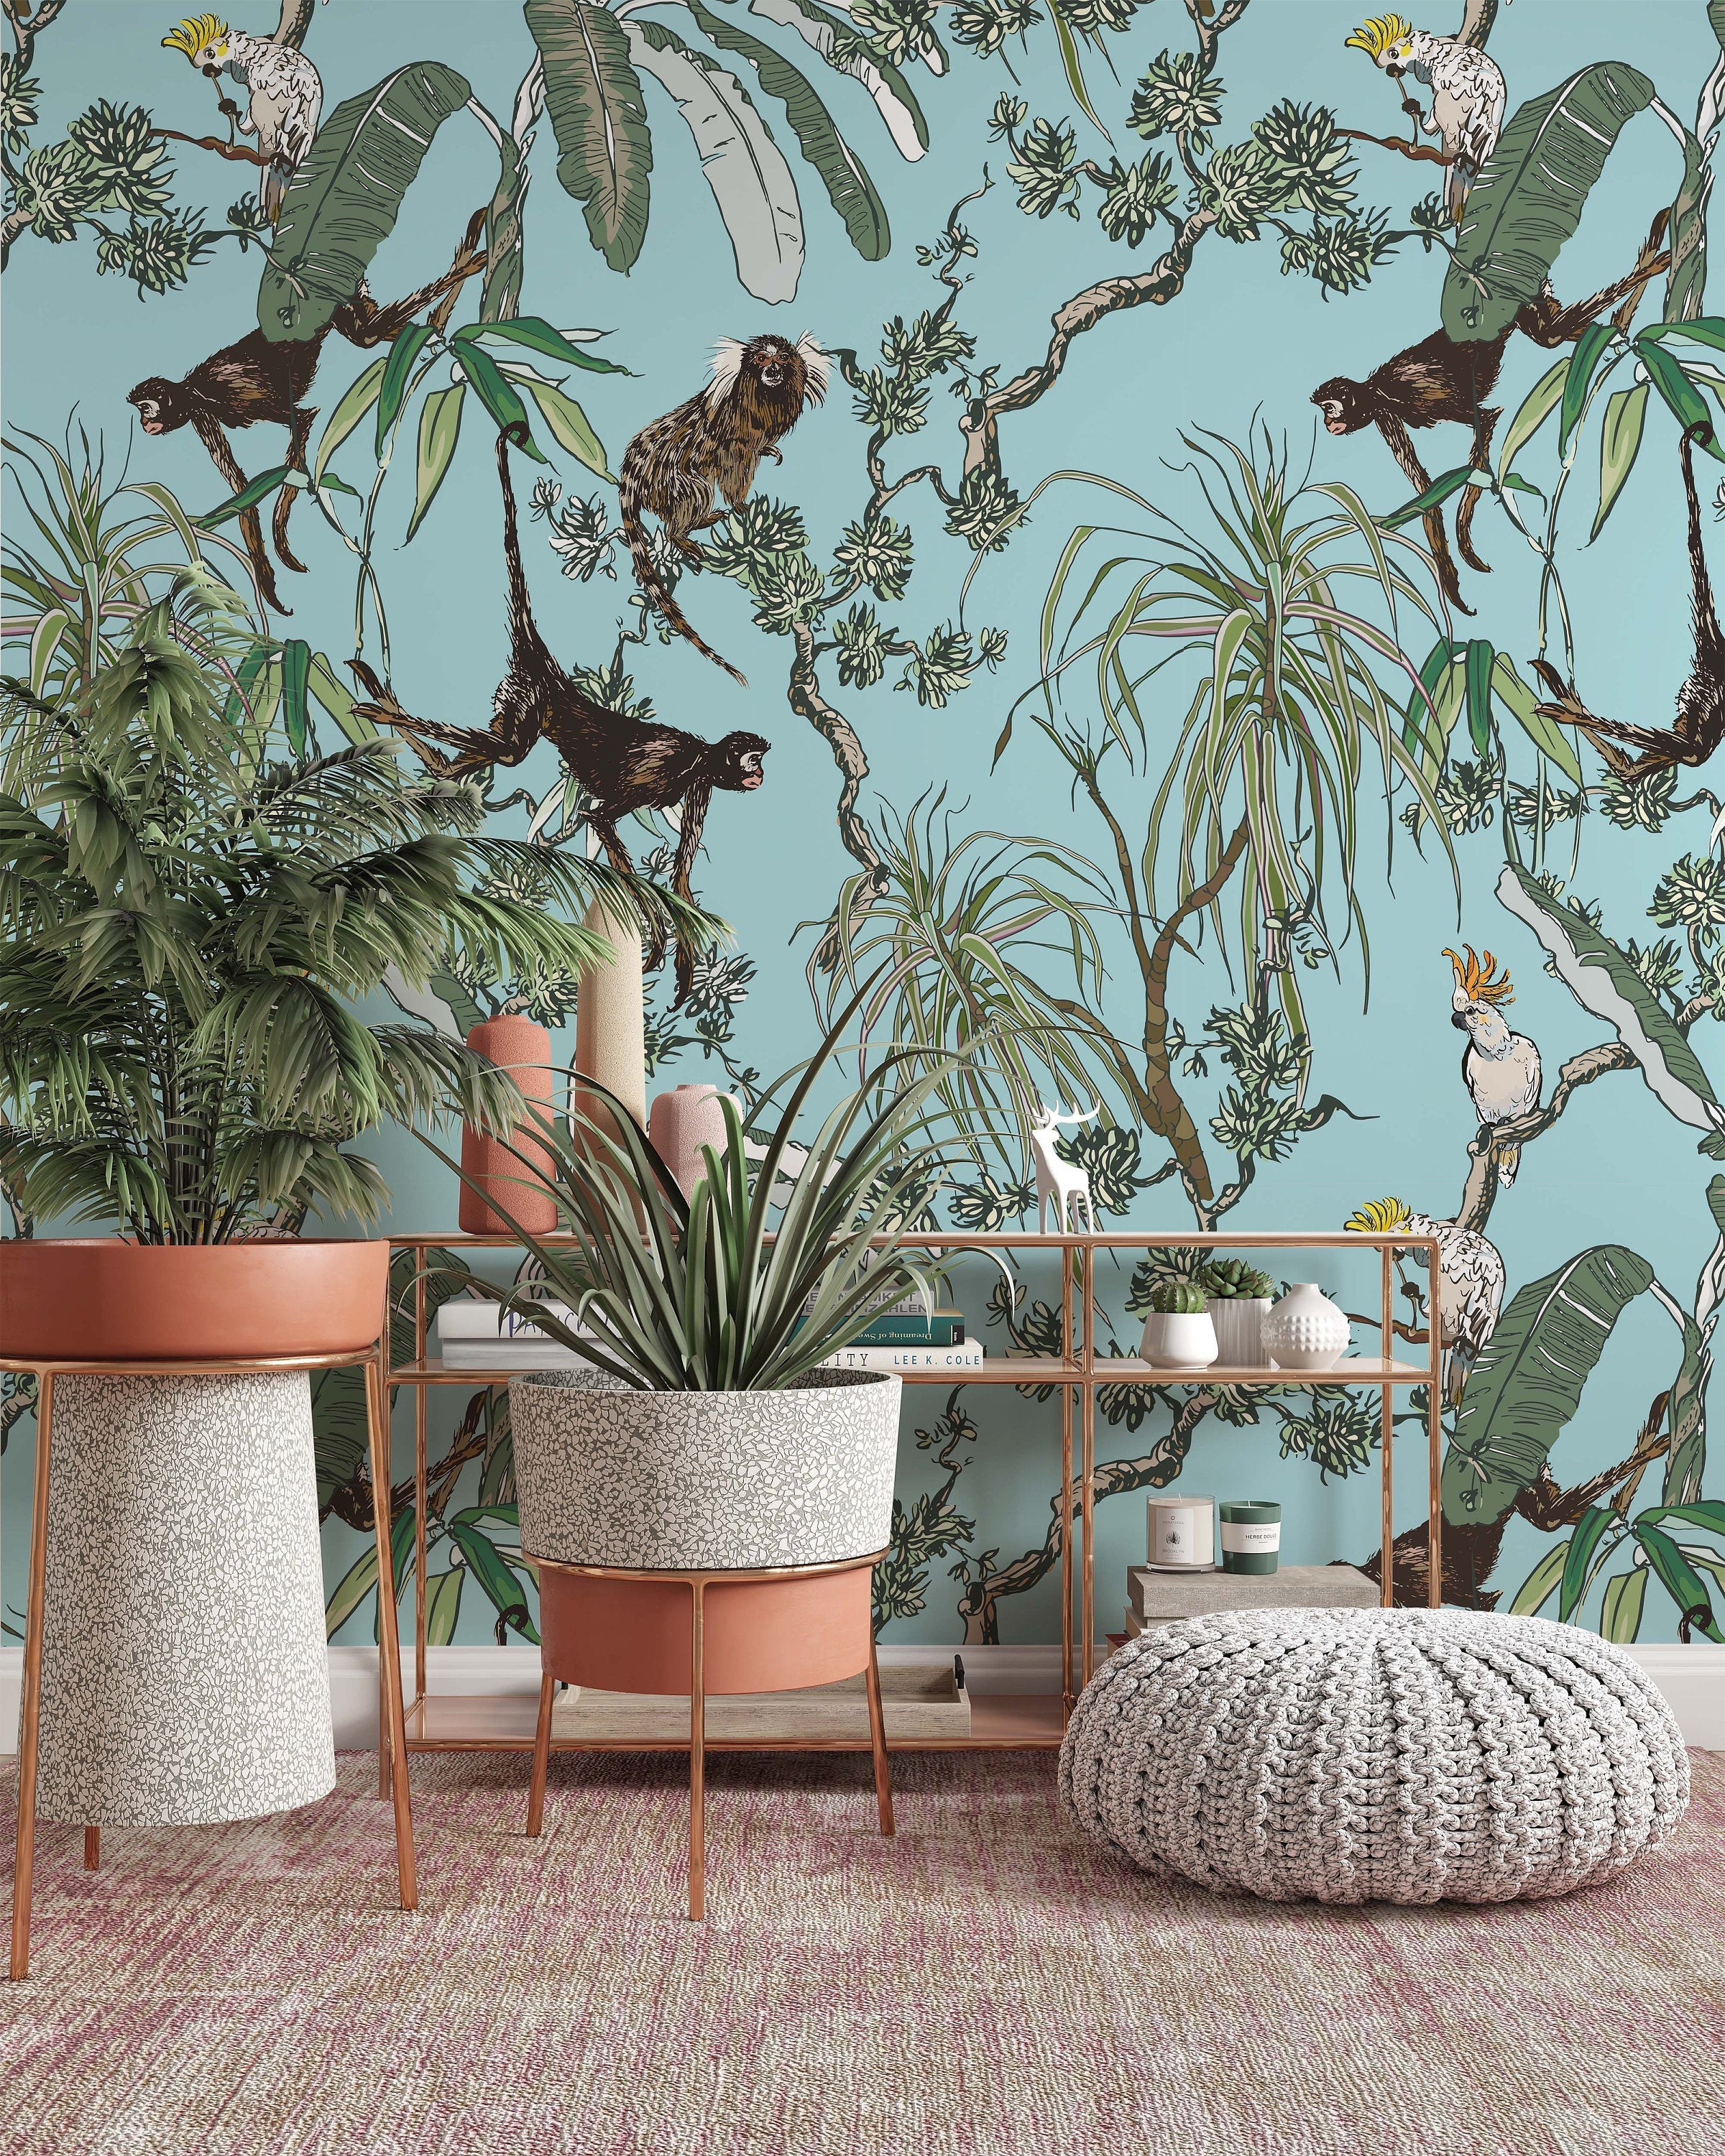 Monkeys and Parrots in Exotic Plants Floral Animal Wallpaper